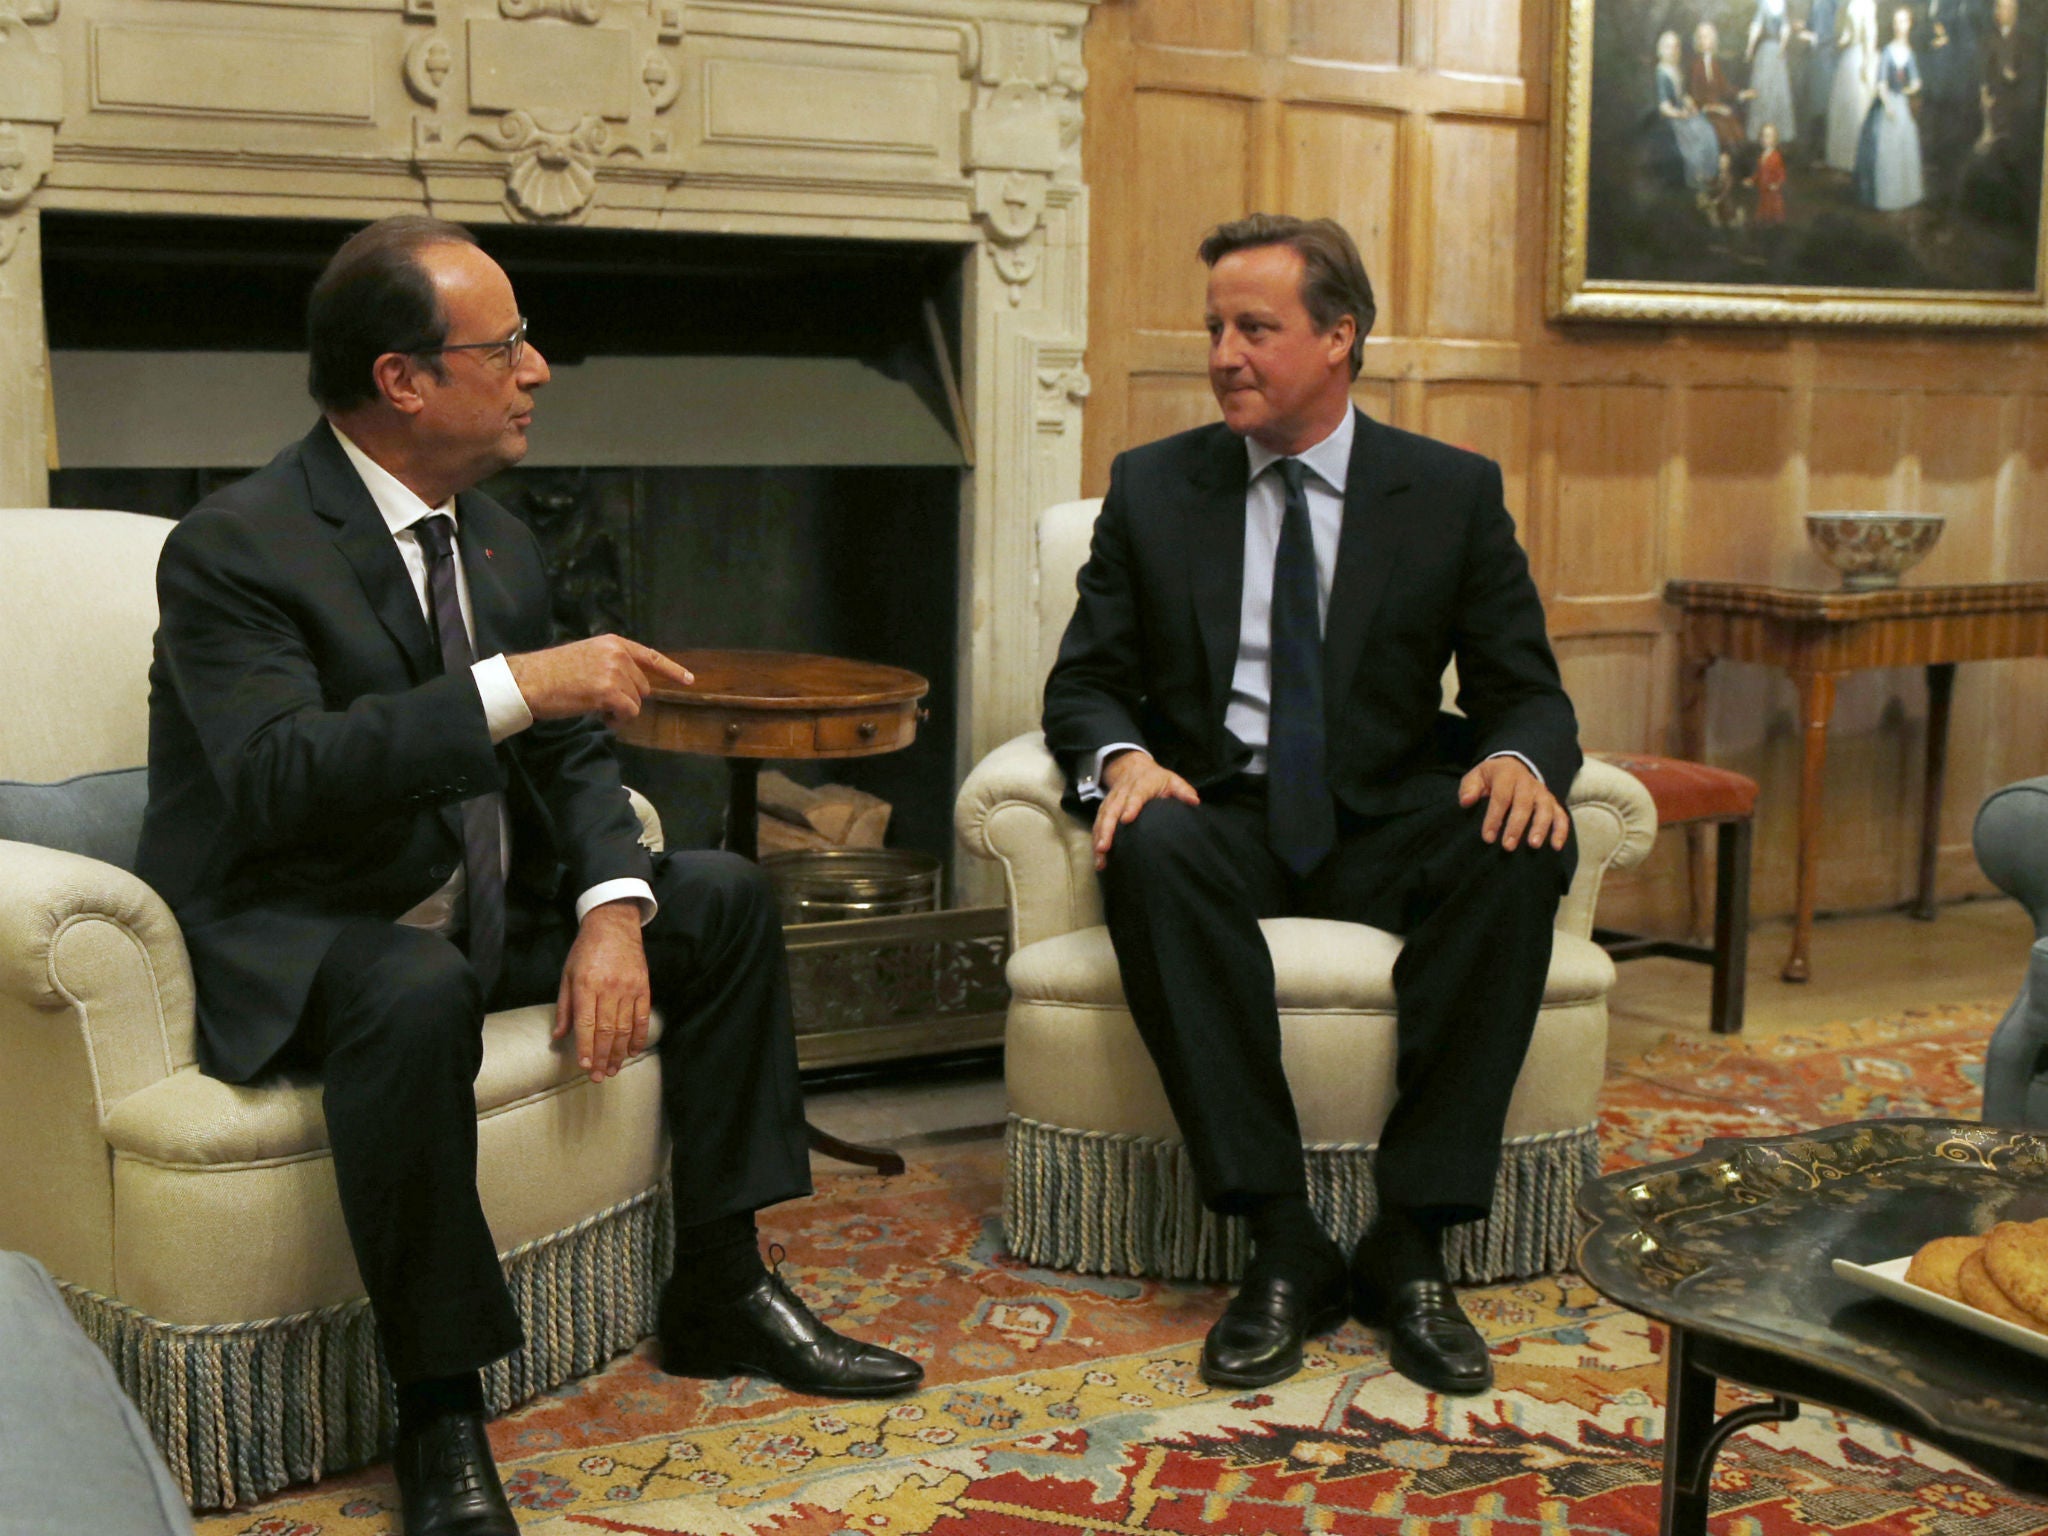 Speaking with French President Francois Hollande, David Cameron said more action was needed to help those with a genuine claim to asylum from war-torn countries